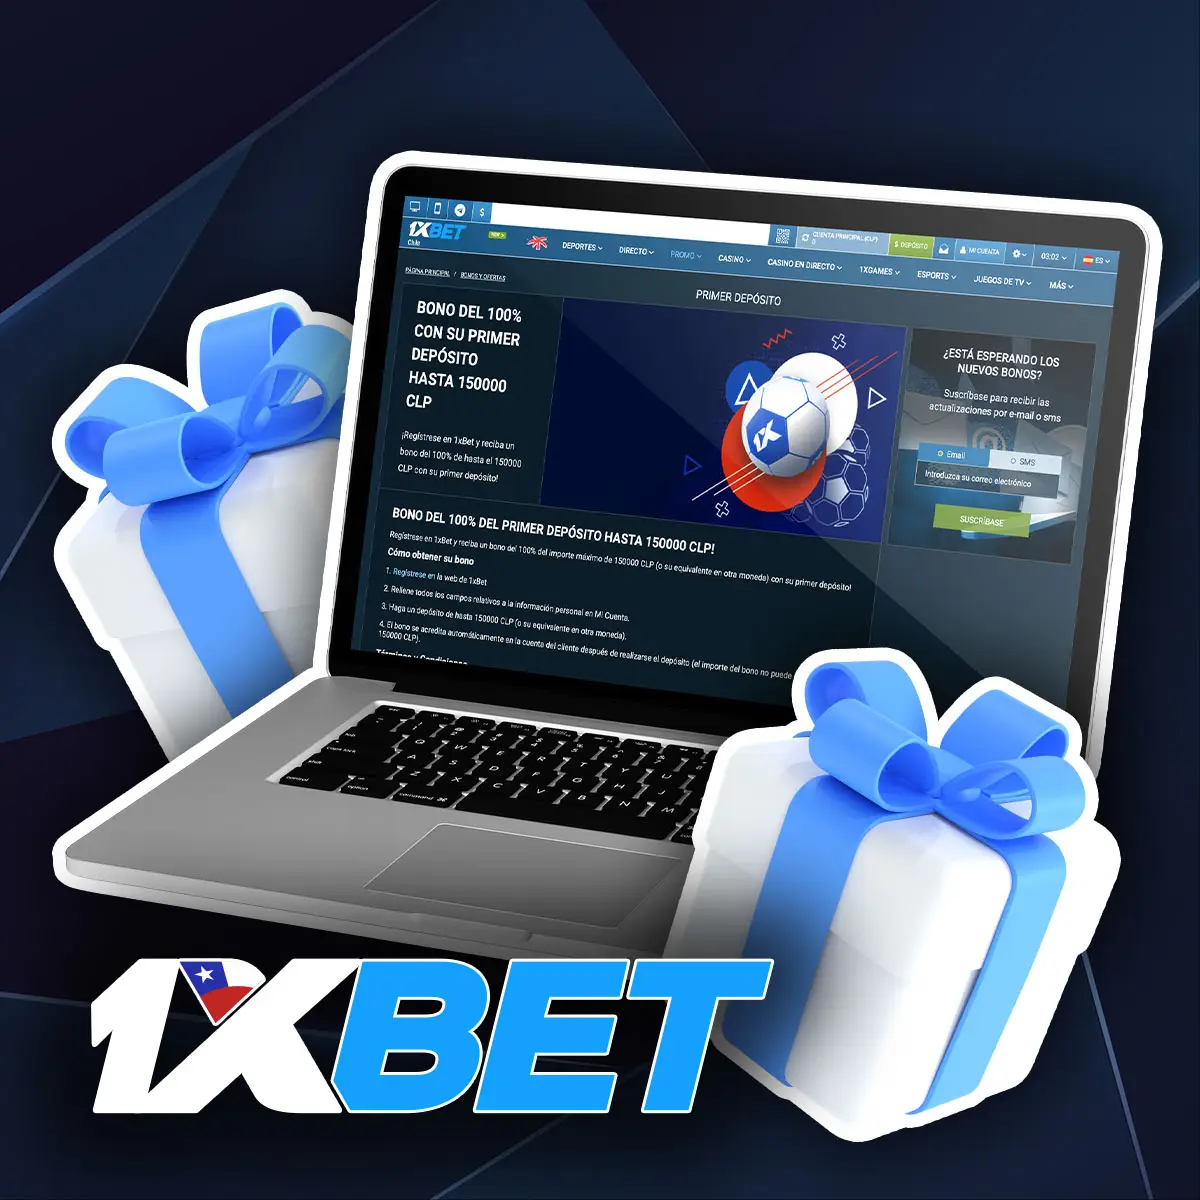 How To Find The Right 1xBet For Your Specific Service